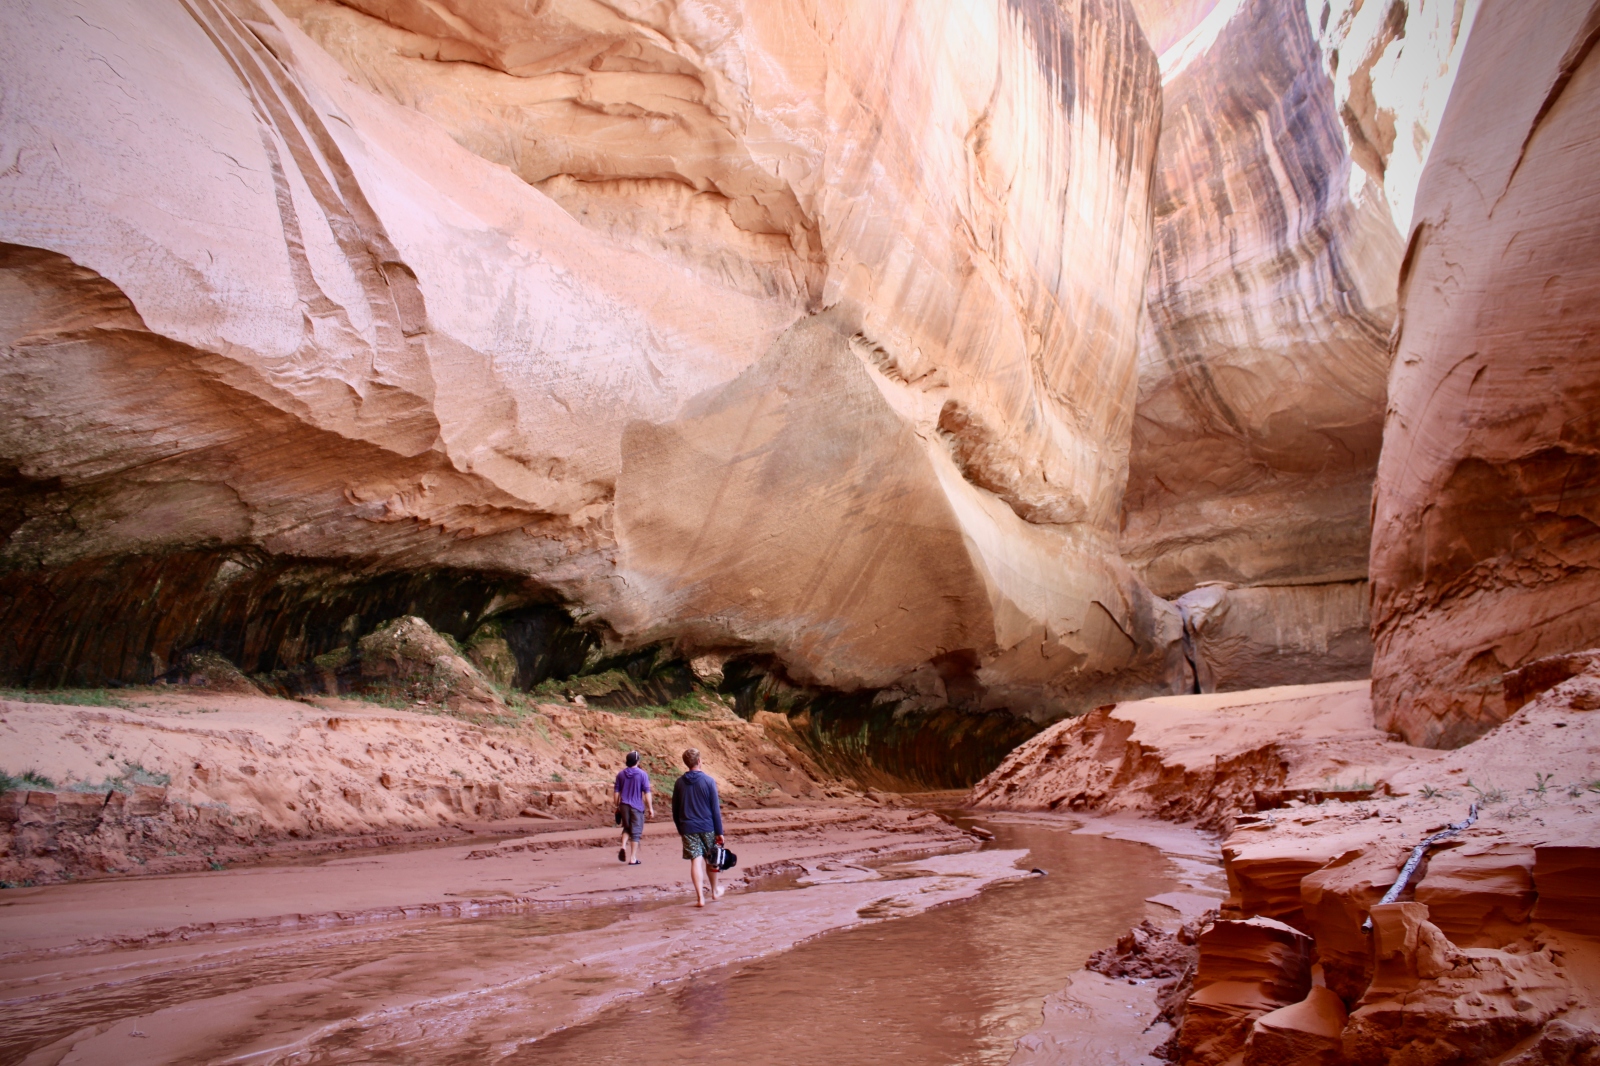 Two people hike through a muddy canyon amid cream-colored rock.